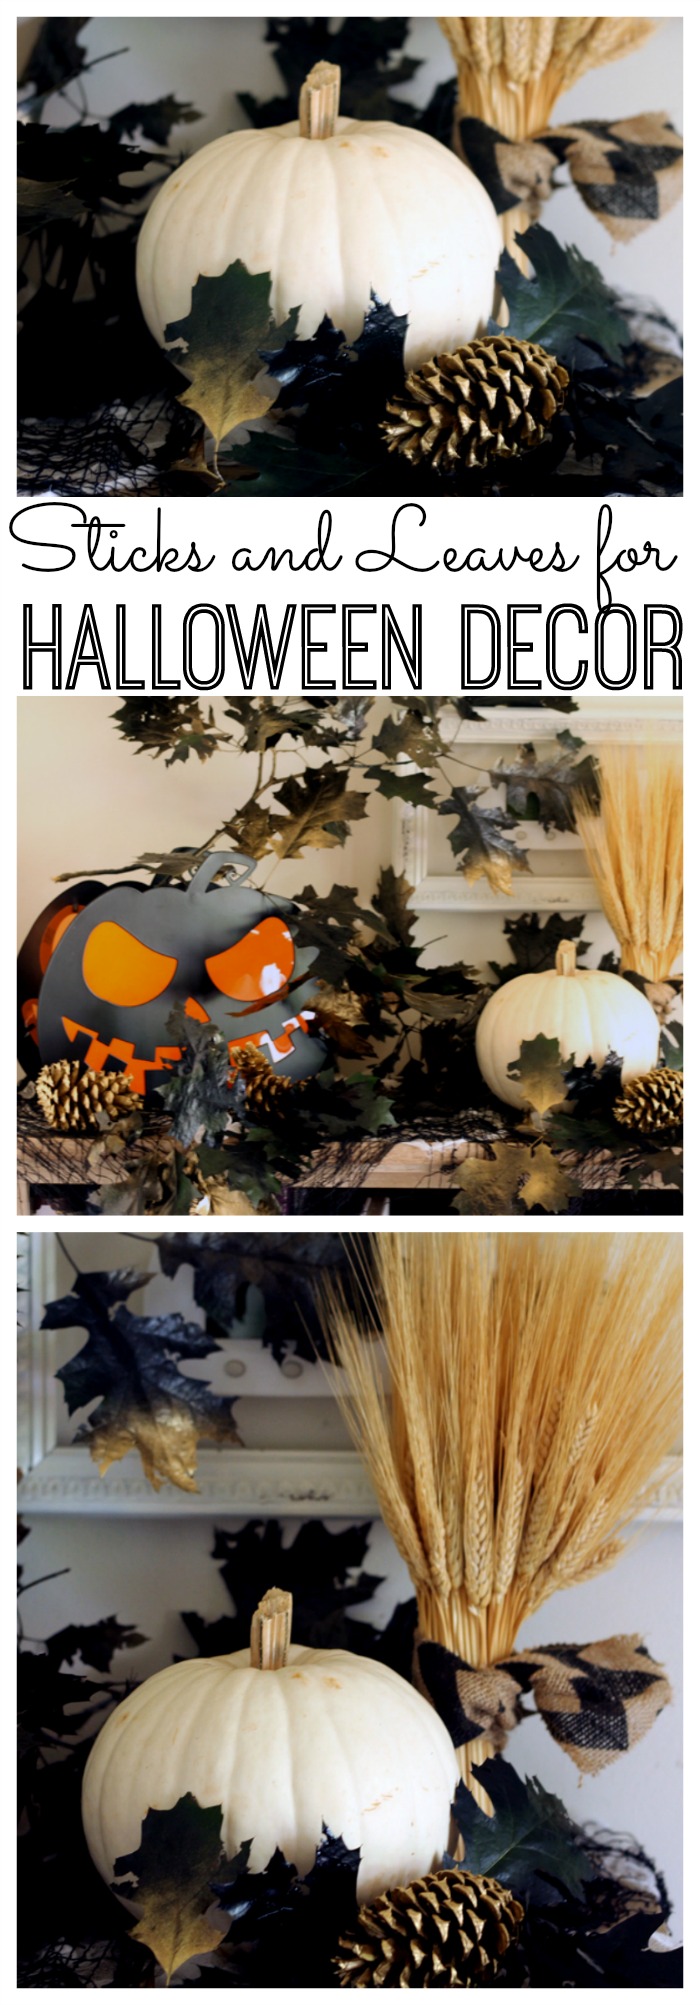 Halloween arrangement with "sticks and leaves for Halloween decor" text overlay